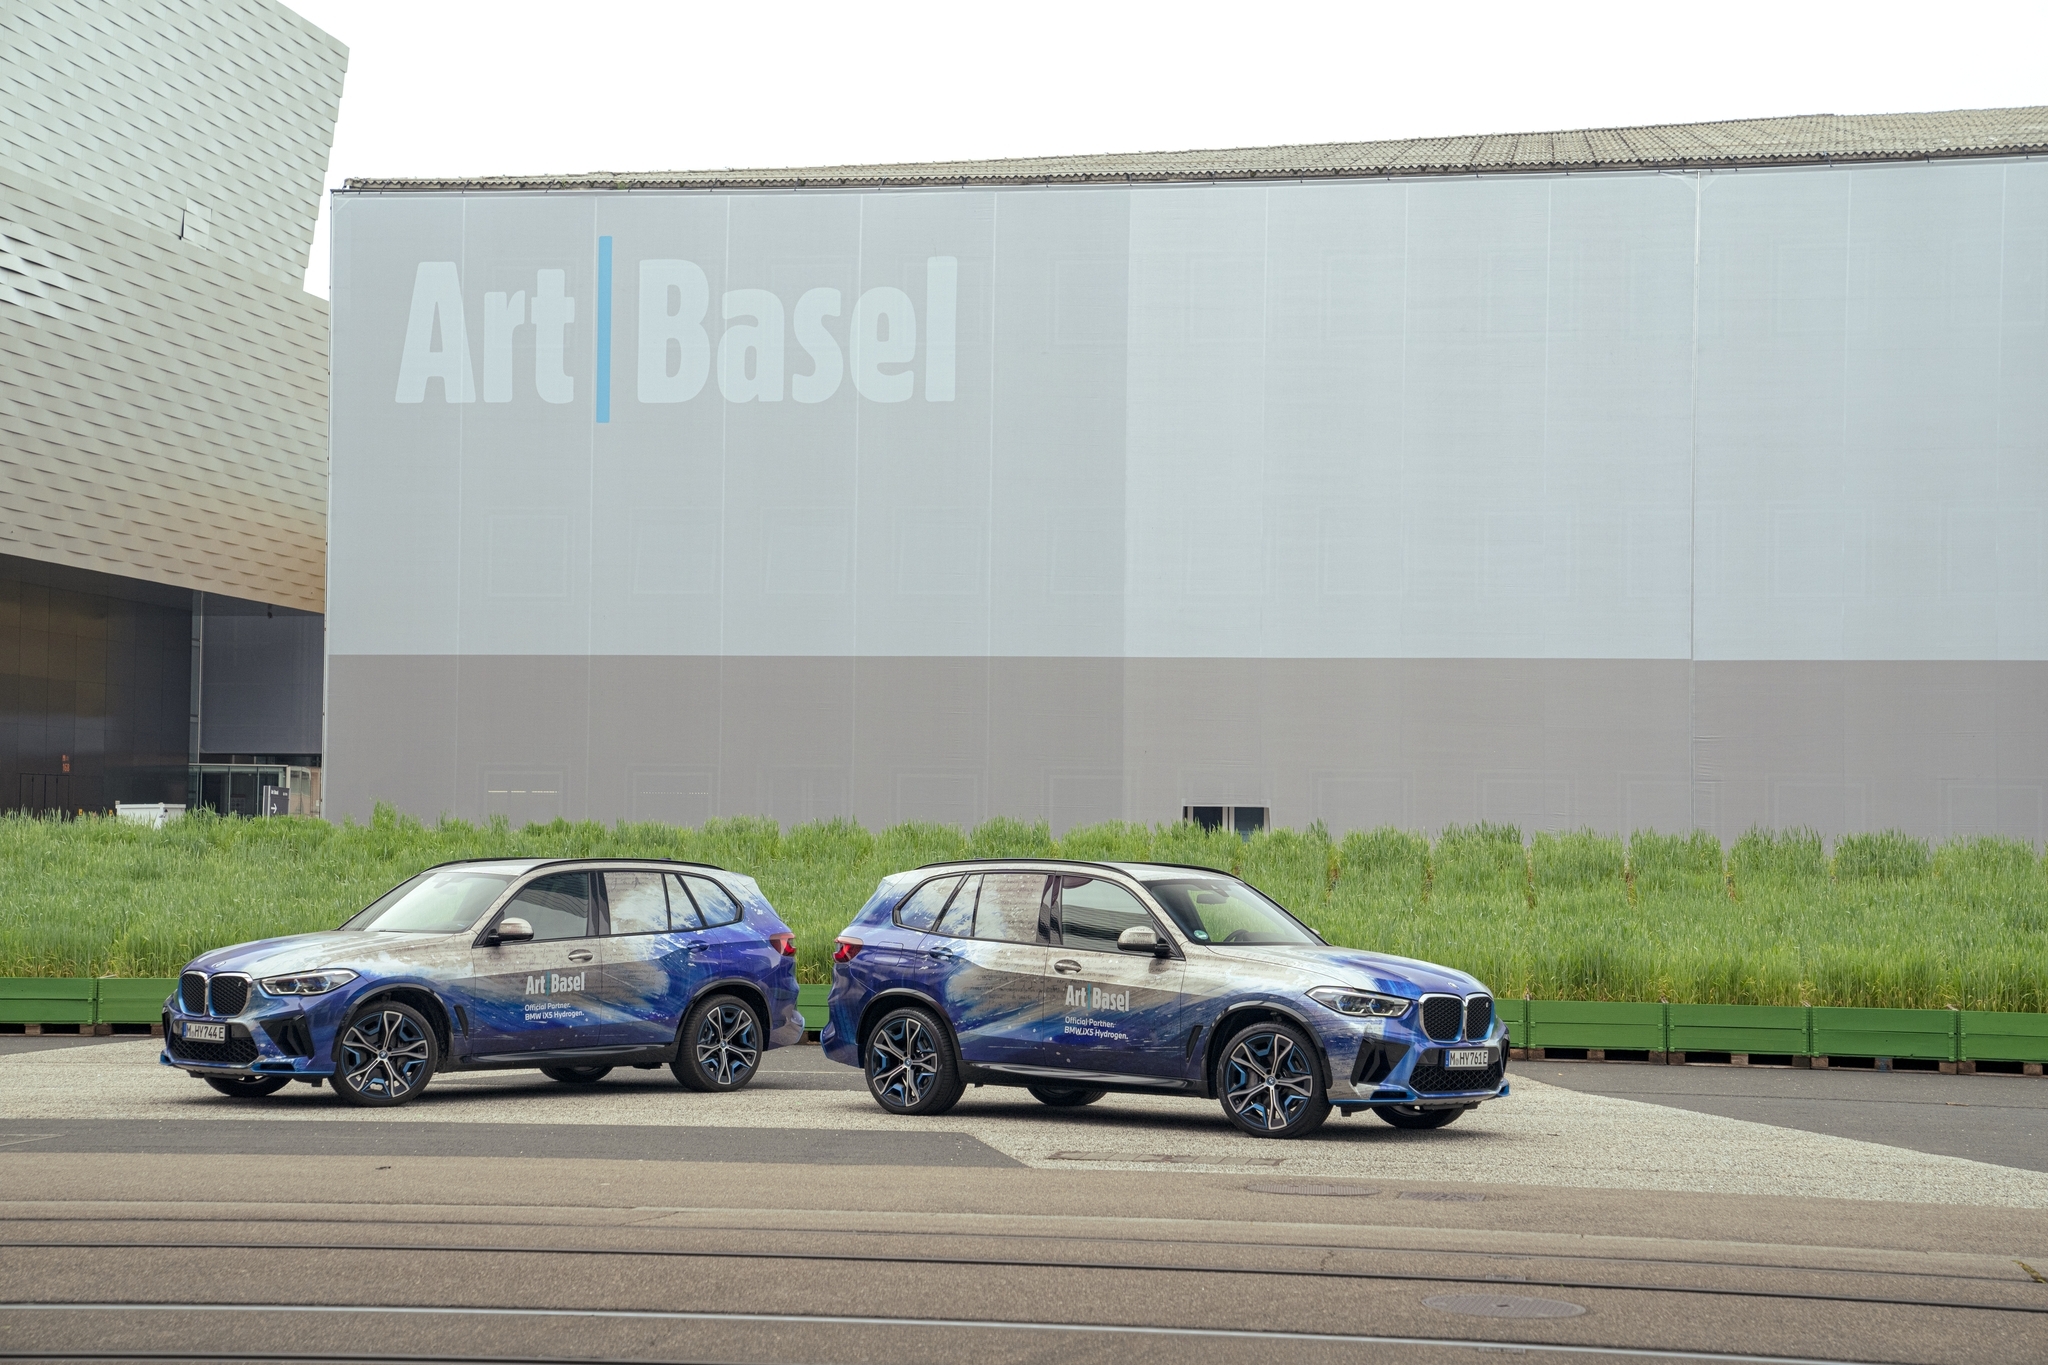 The BMW iX5 Hydrogen hydrogen crossover has been turned into an environmentally friendly art car